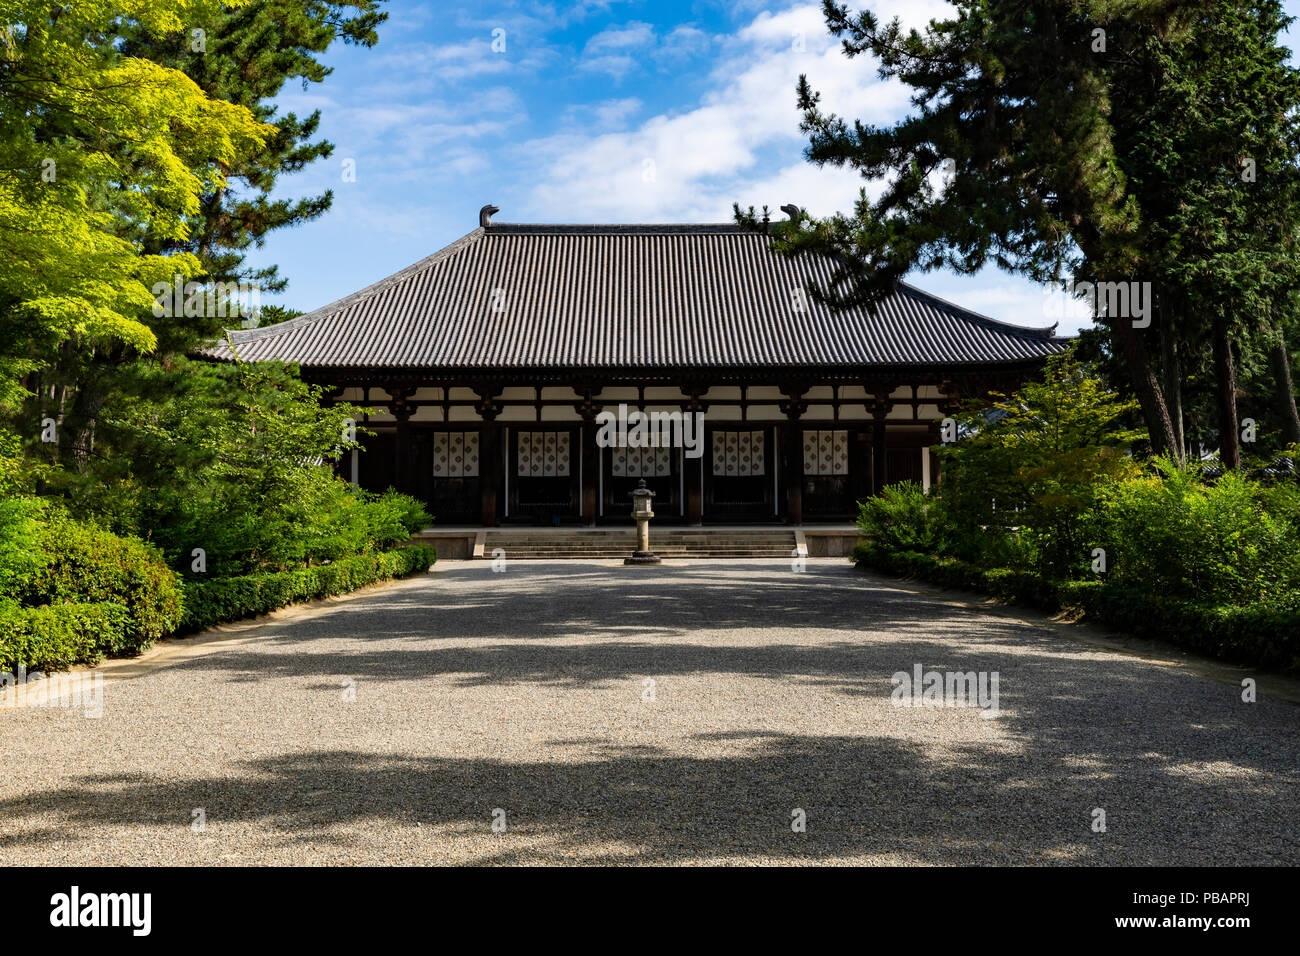 Toshodai-ji Temple was founded by Ganjin - a Chinese priest invited to Japan by the emperor to train priests and teach Buddhism so its influence propa Stock Photo